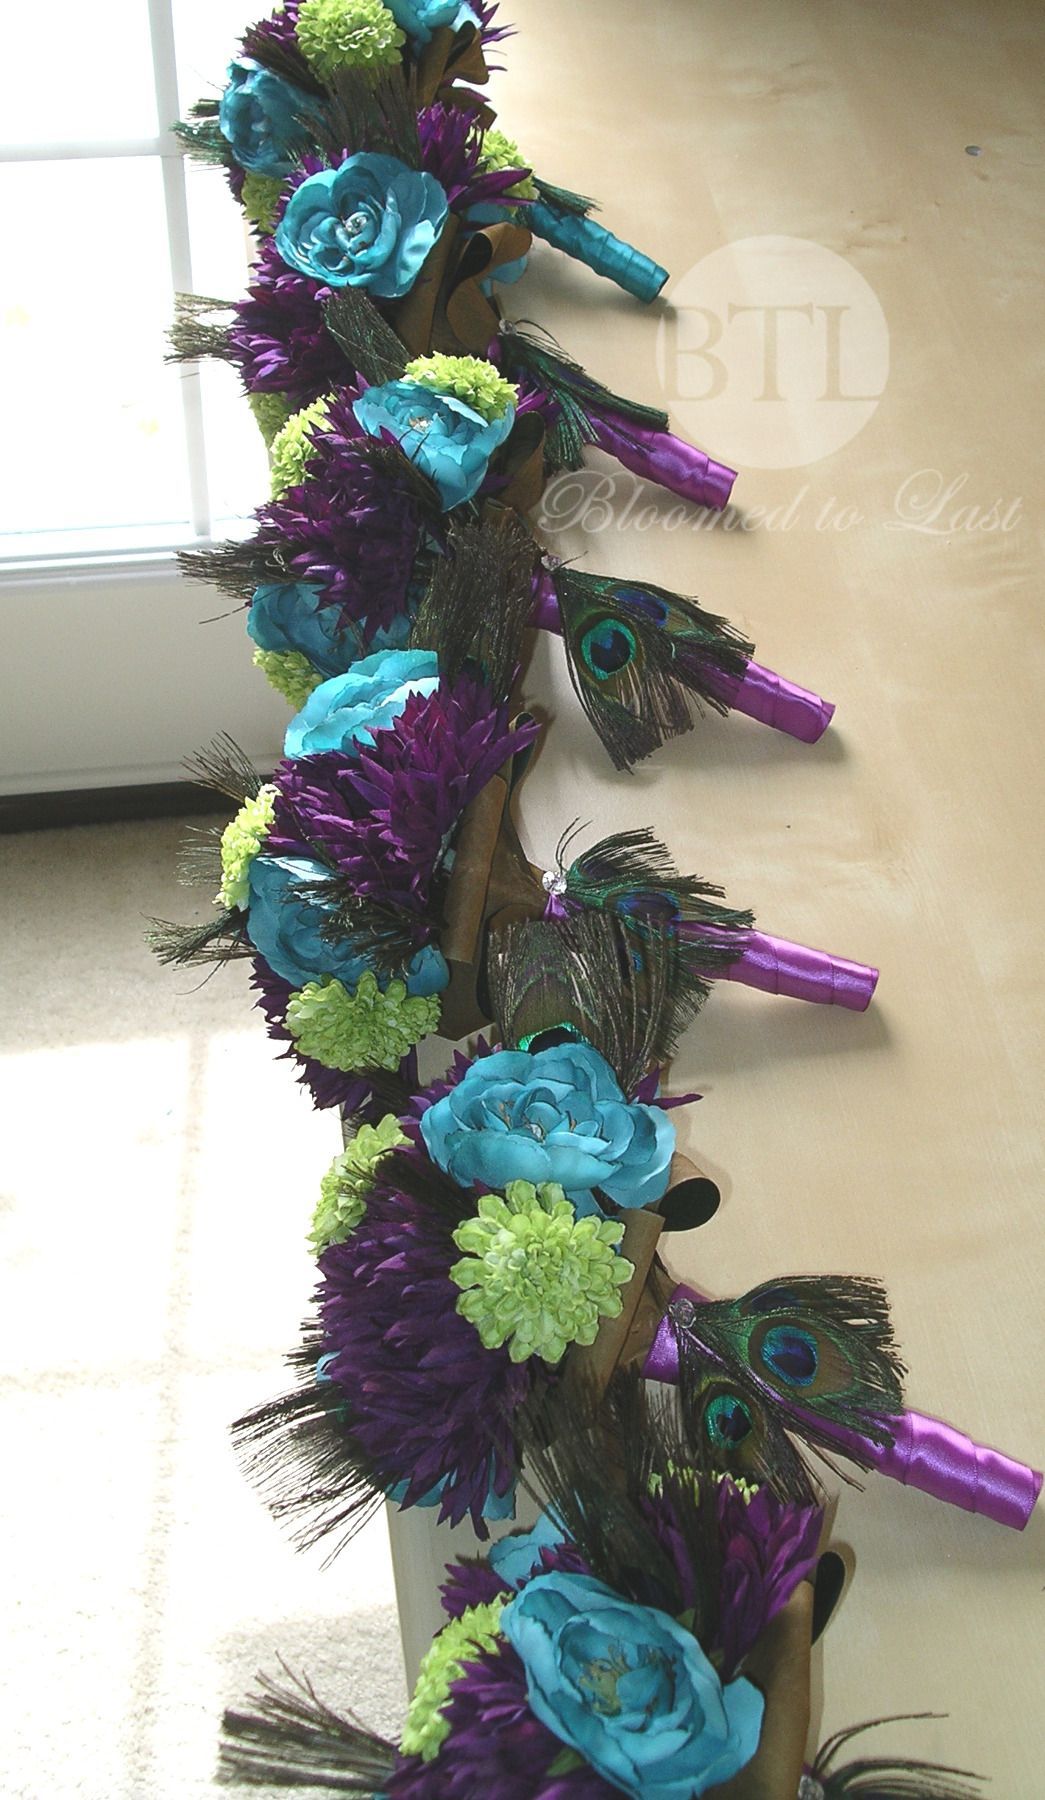 Stunning group of bridesmaids Peacock feather wedding bouquets all lined up and ready to go. Wouldn’t these be prefect for your